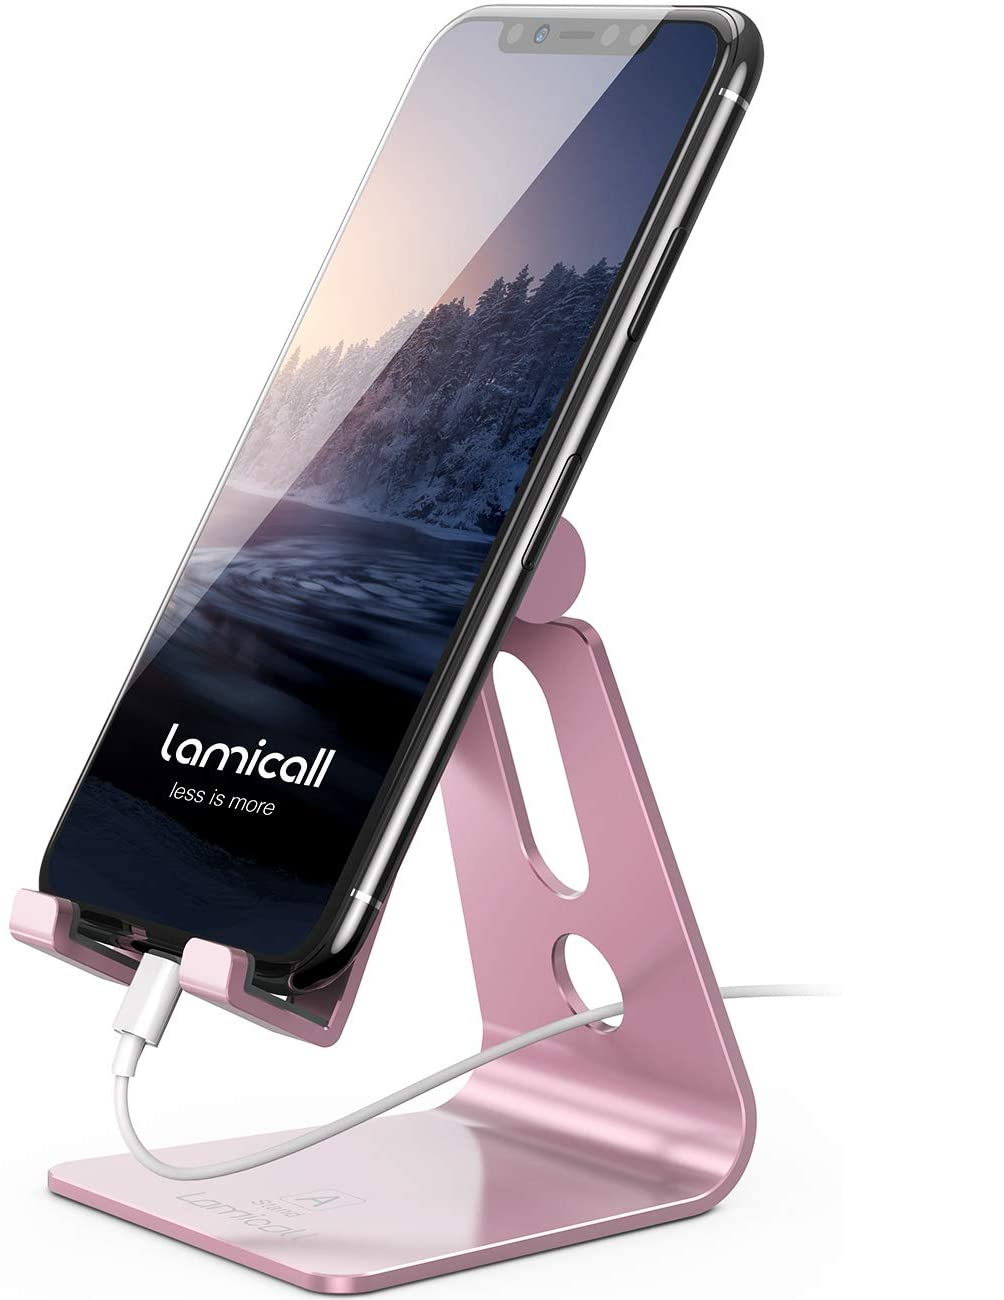 Lamicall Phone Stand for MagSafe Charger - Adjustable Aluminum